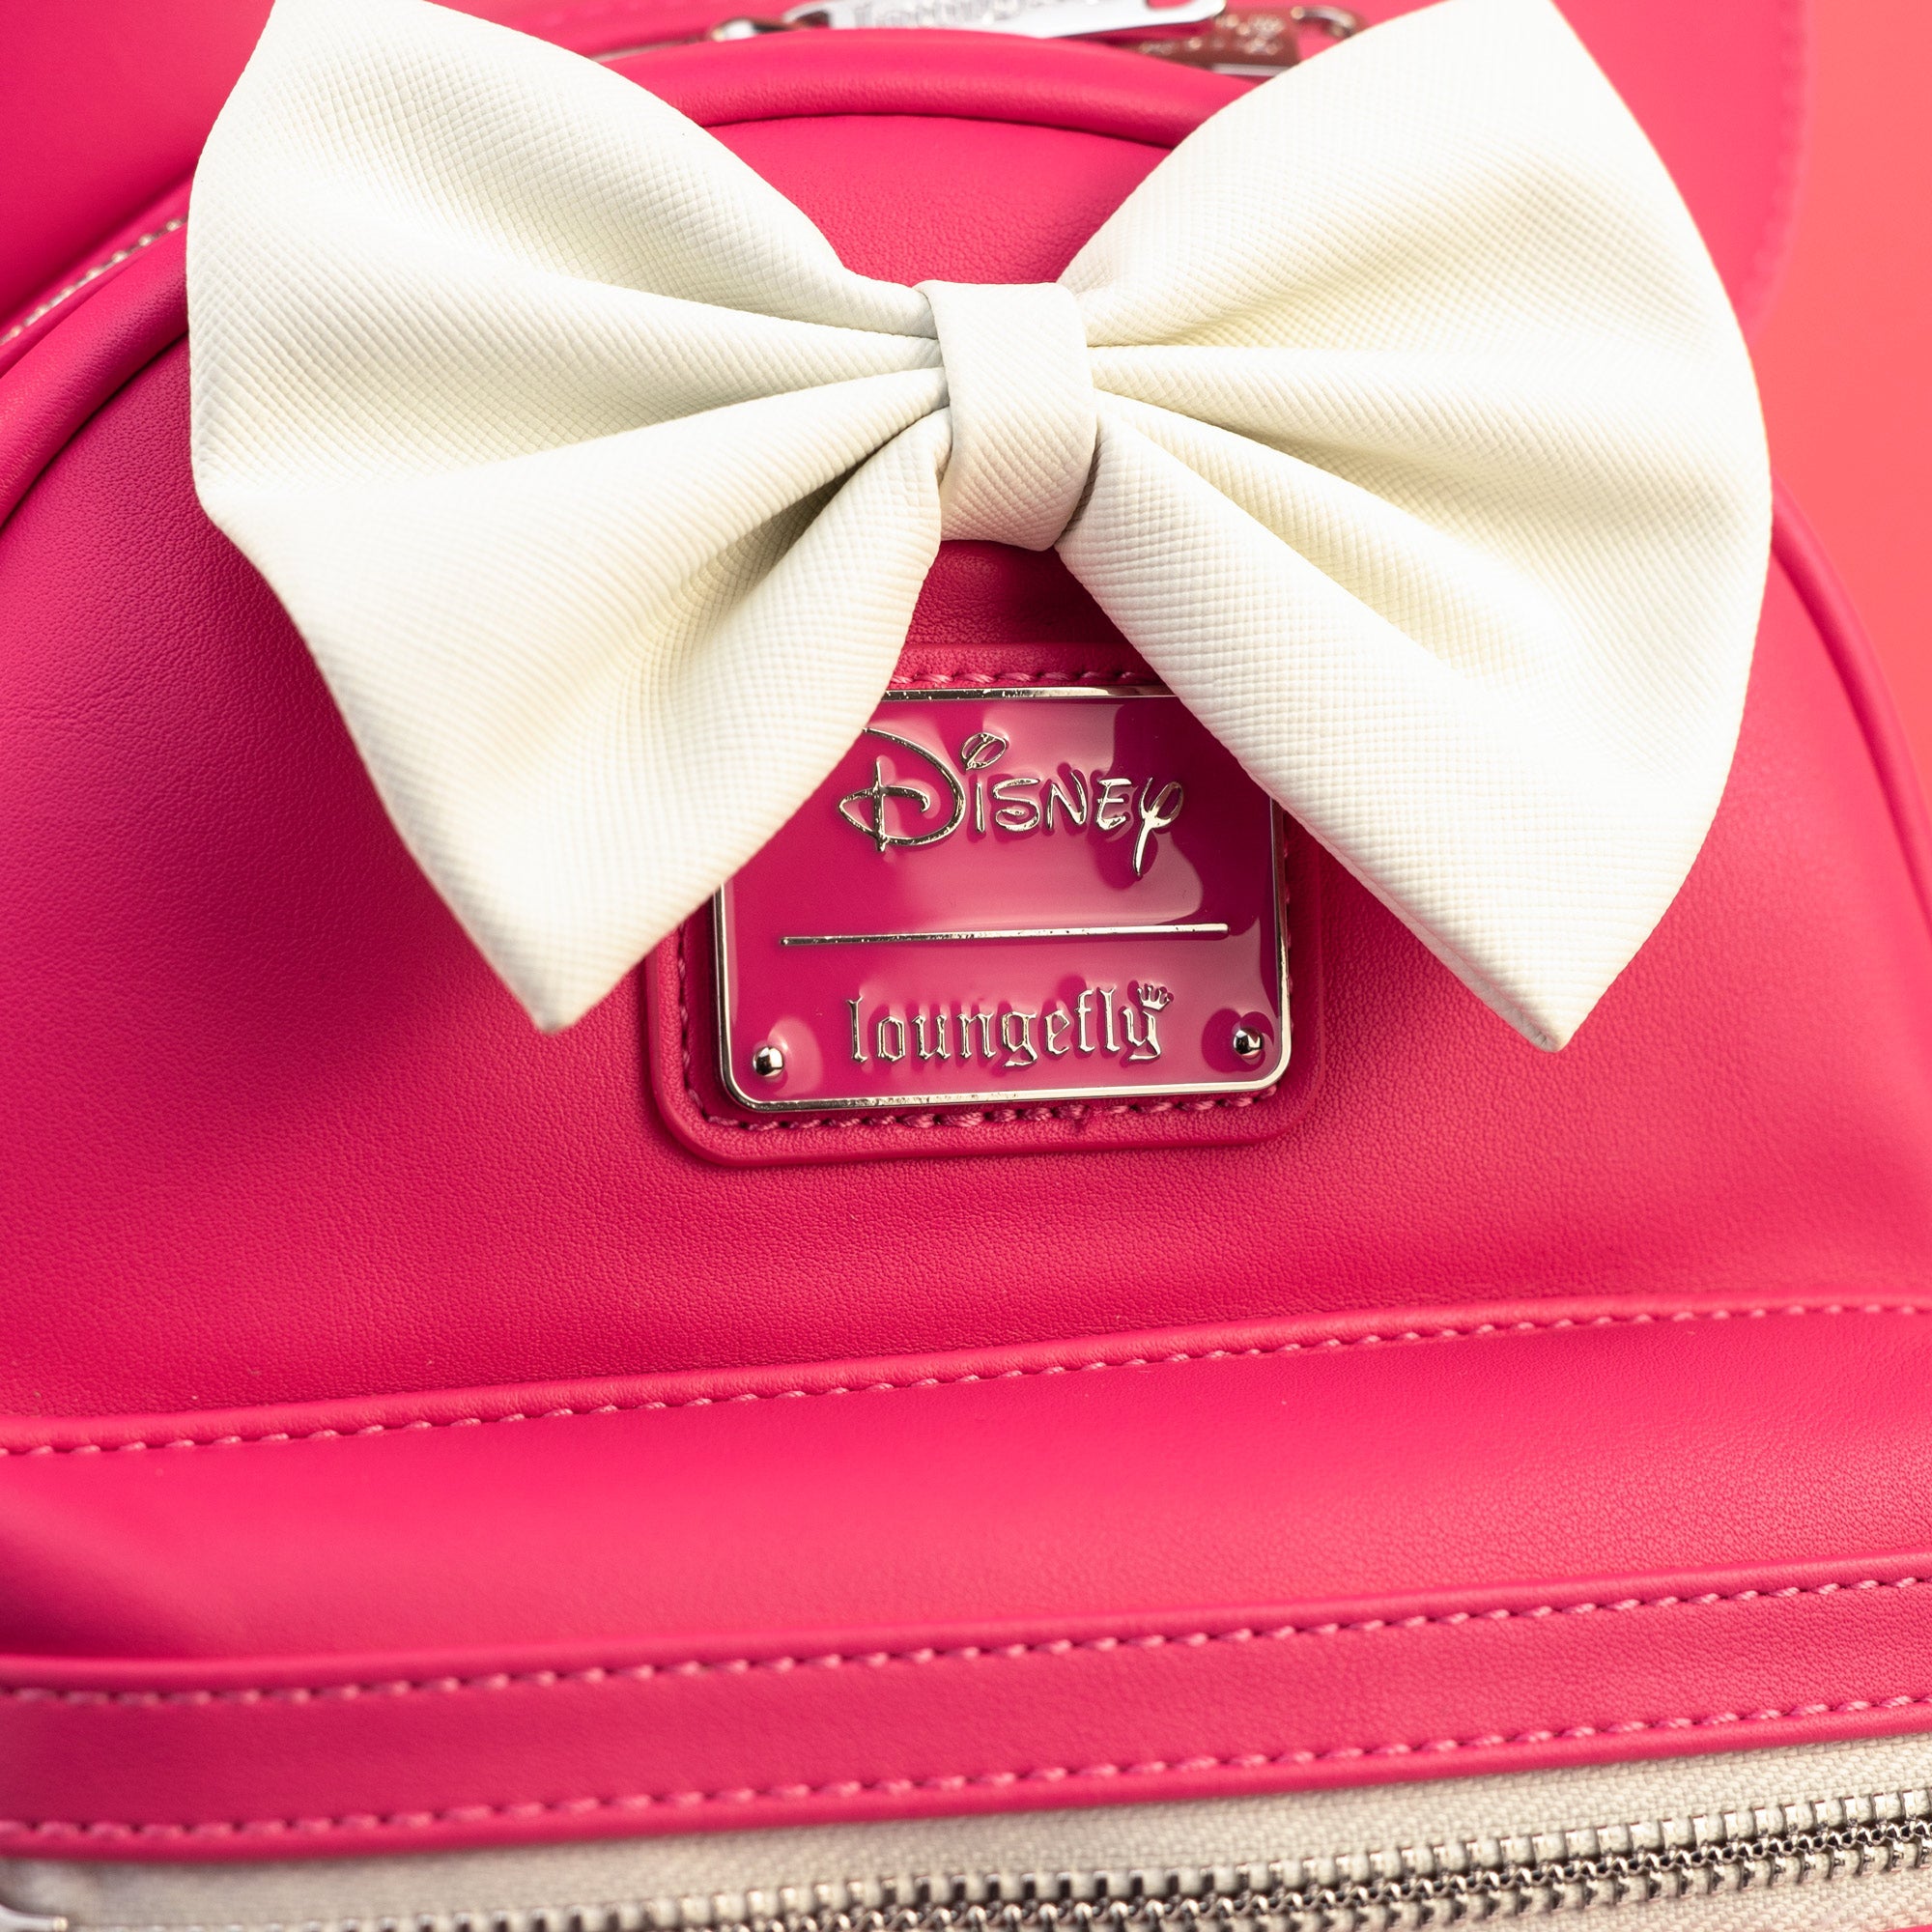 Loungefly x Disney Minnie Mouse Hot-Pink ‘Glowberry’ Quilted Mini Backpack